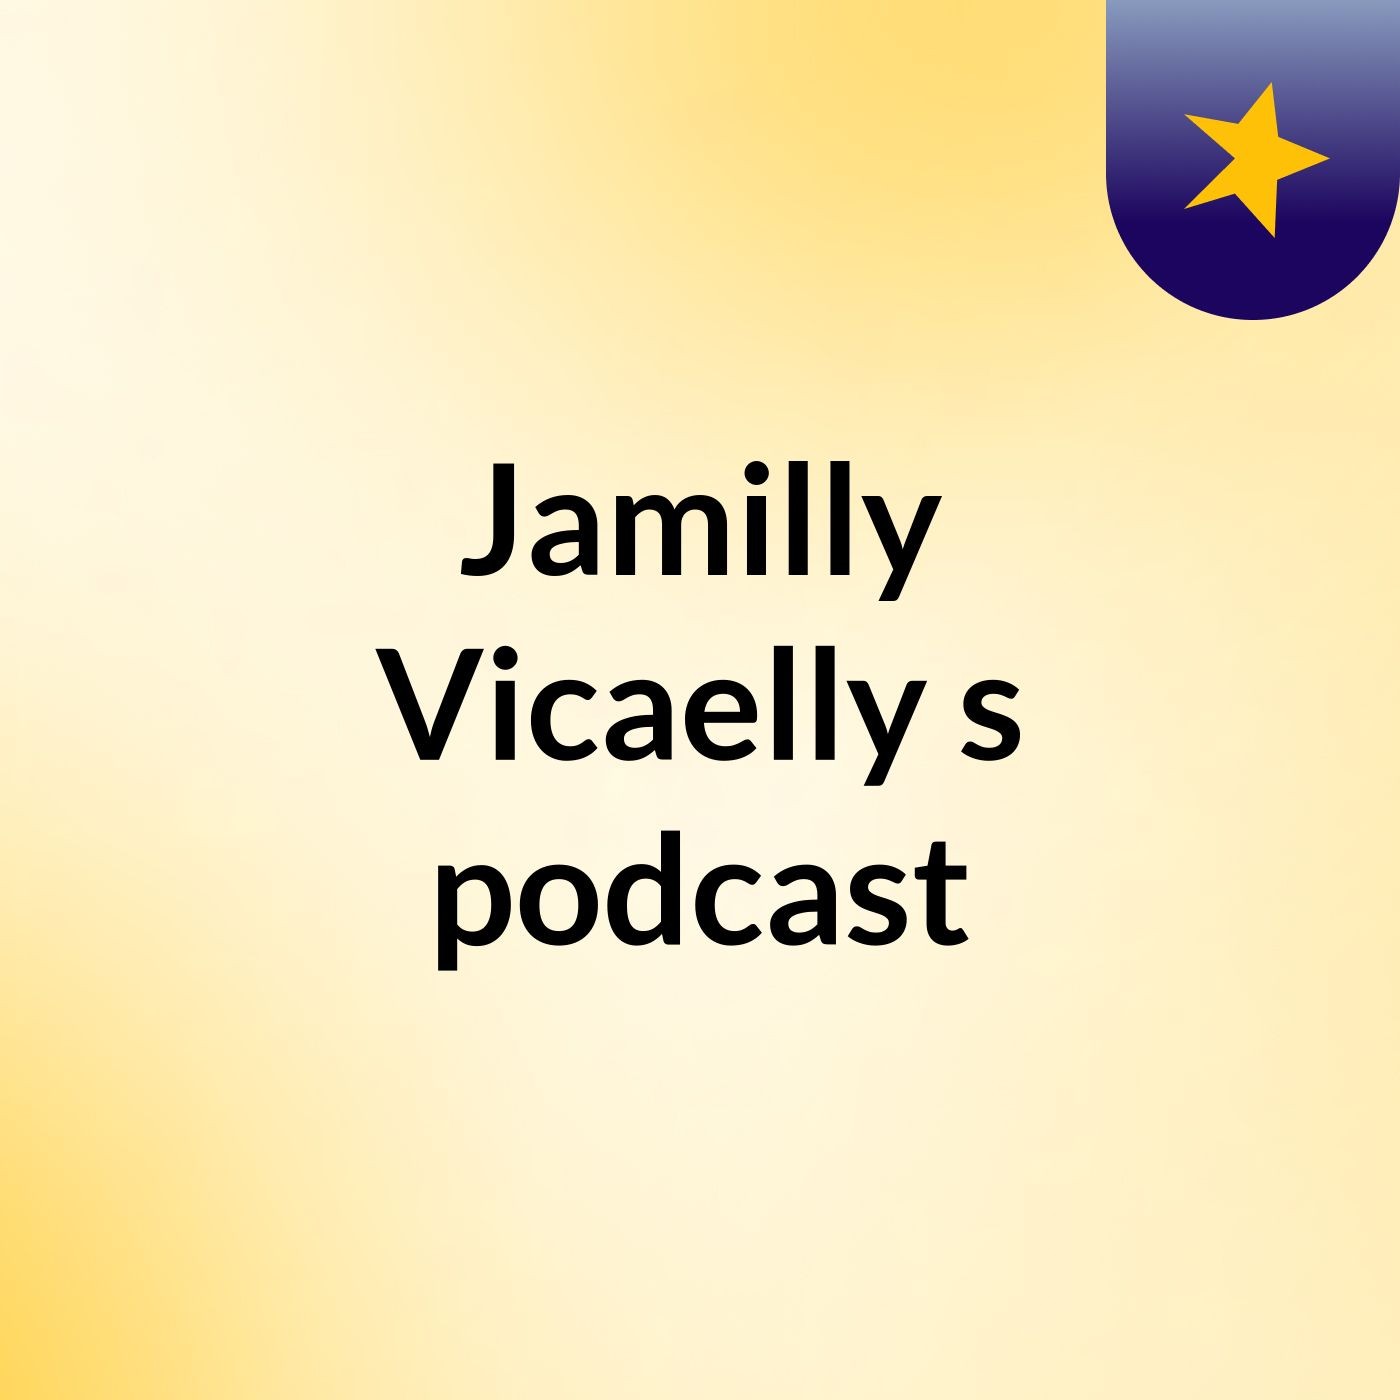 Jamilly Vicaelly's podcast